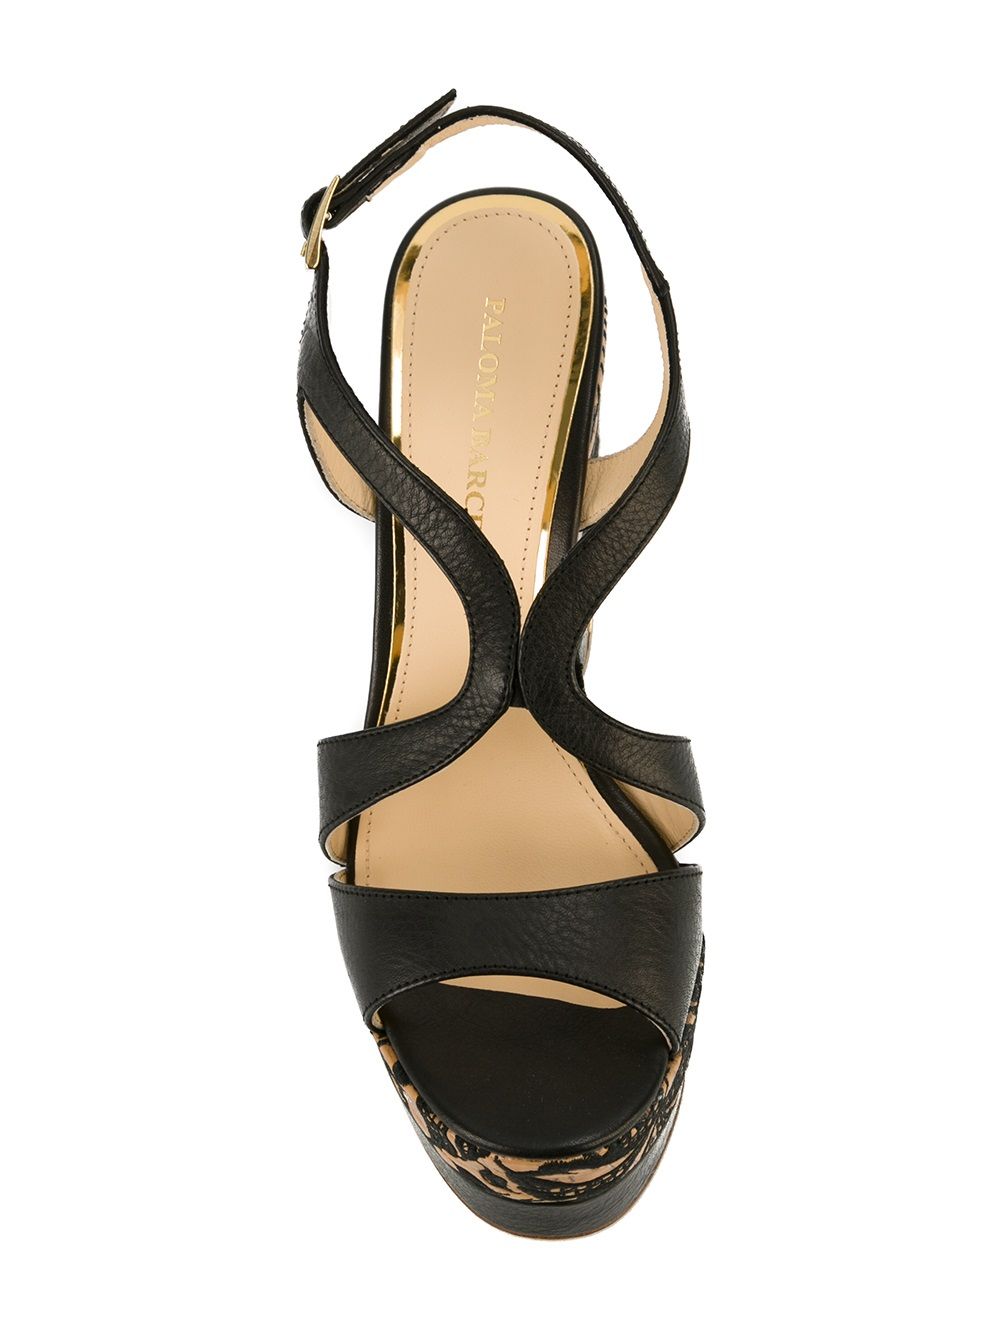 Paloma Barceló Embroidered Wedge Sandals - Farfetch